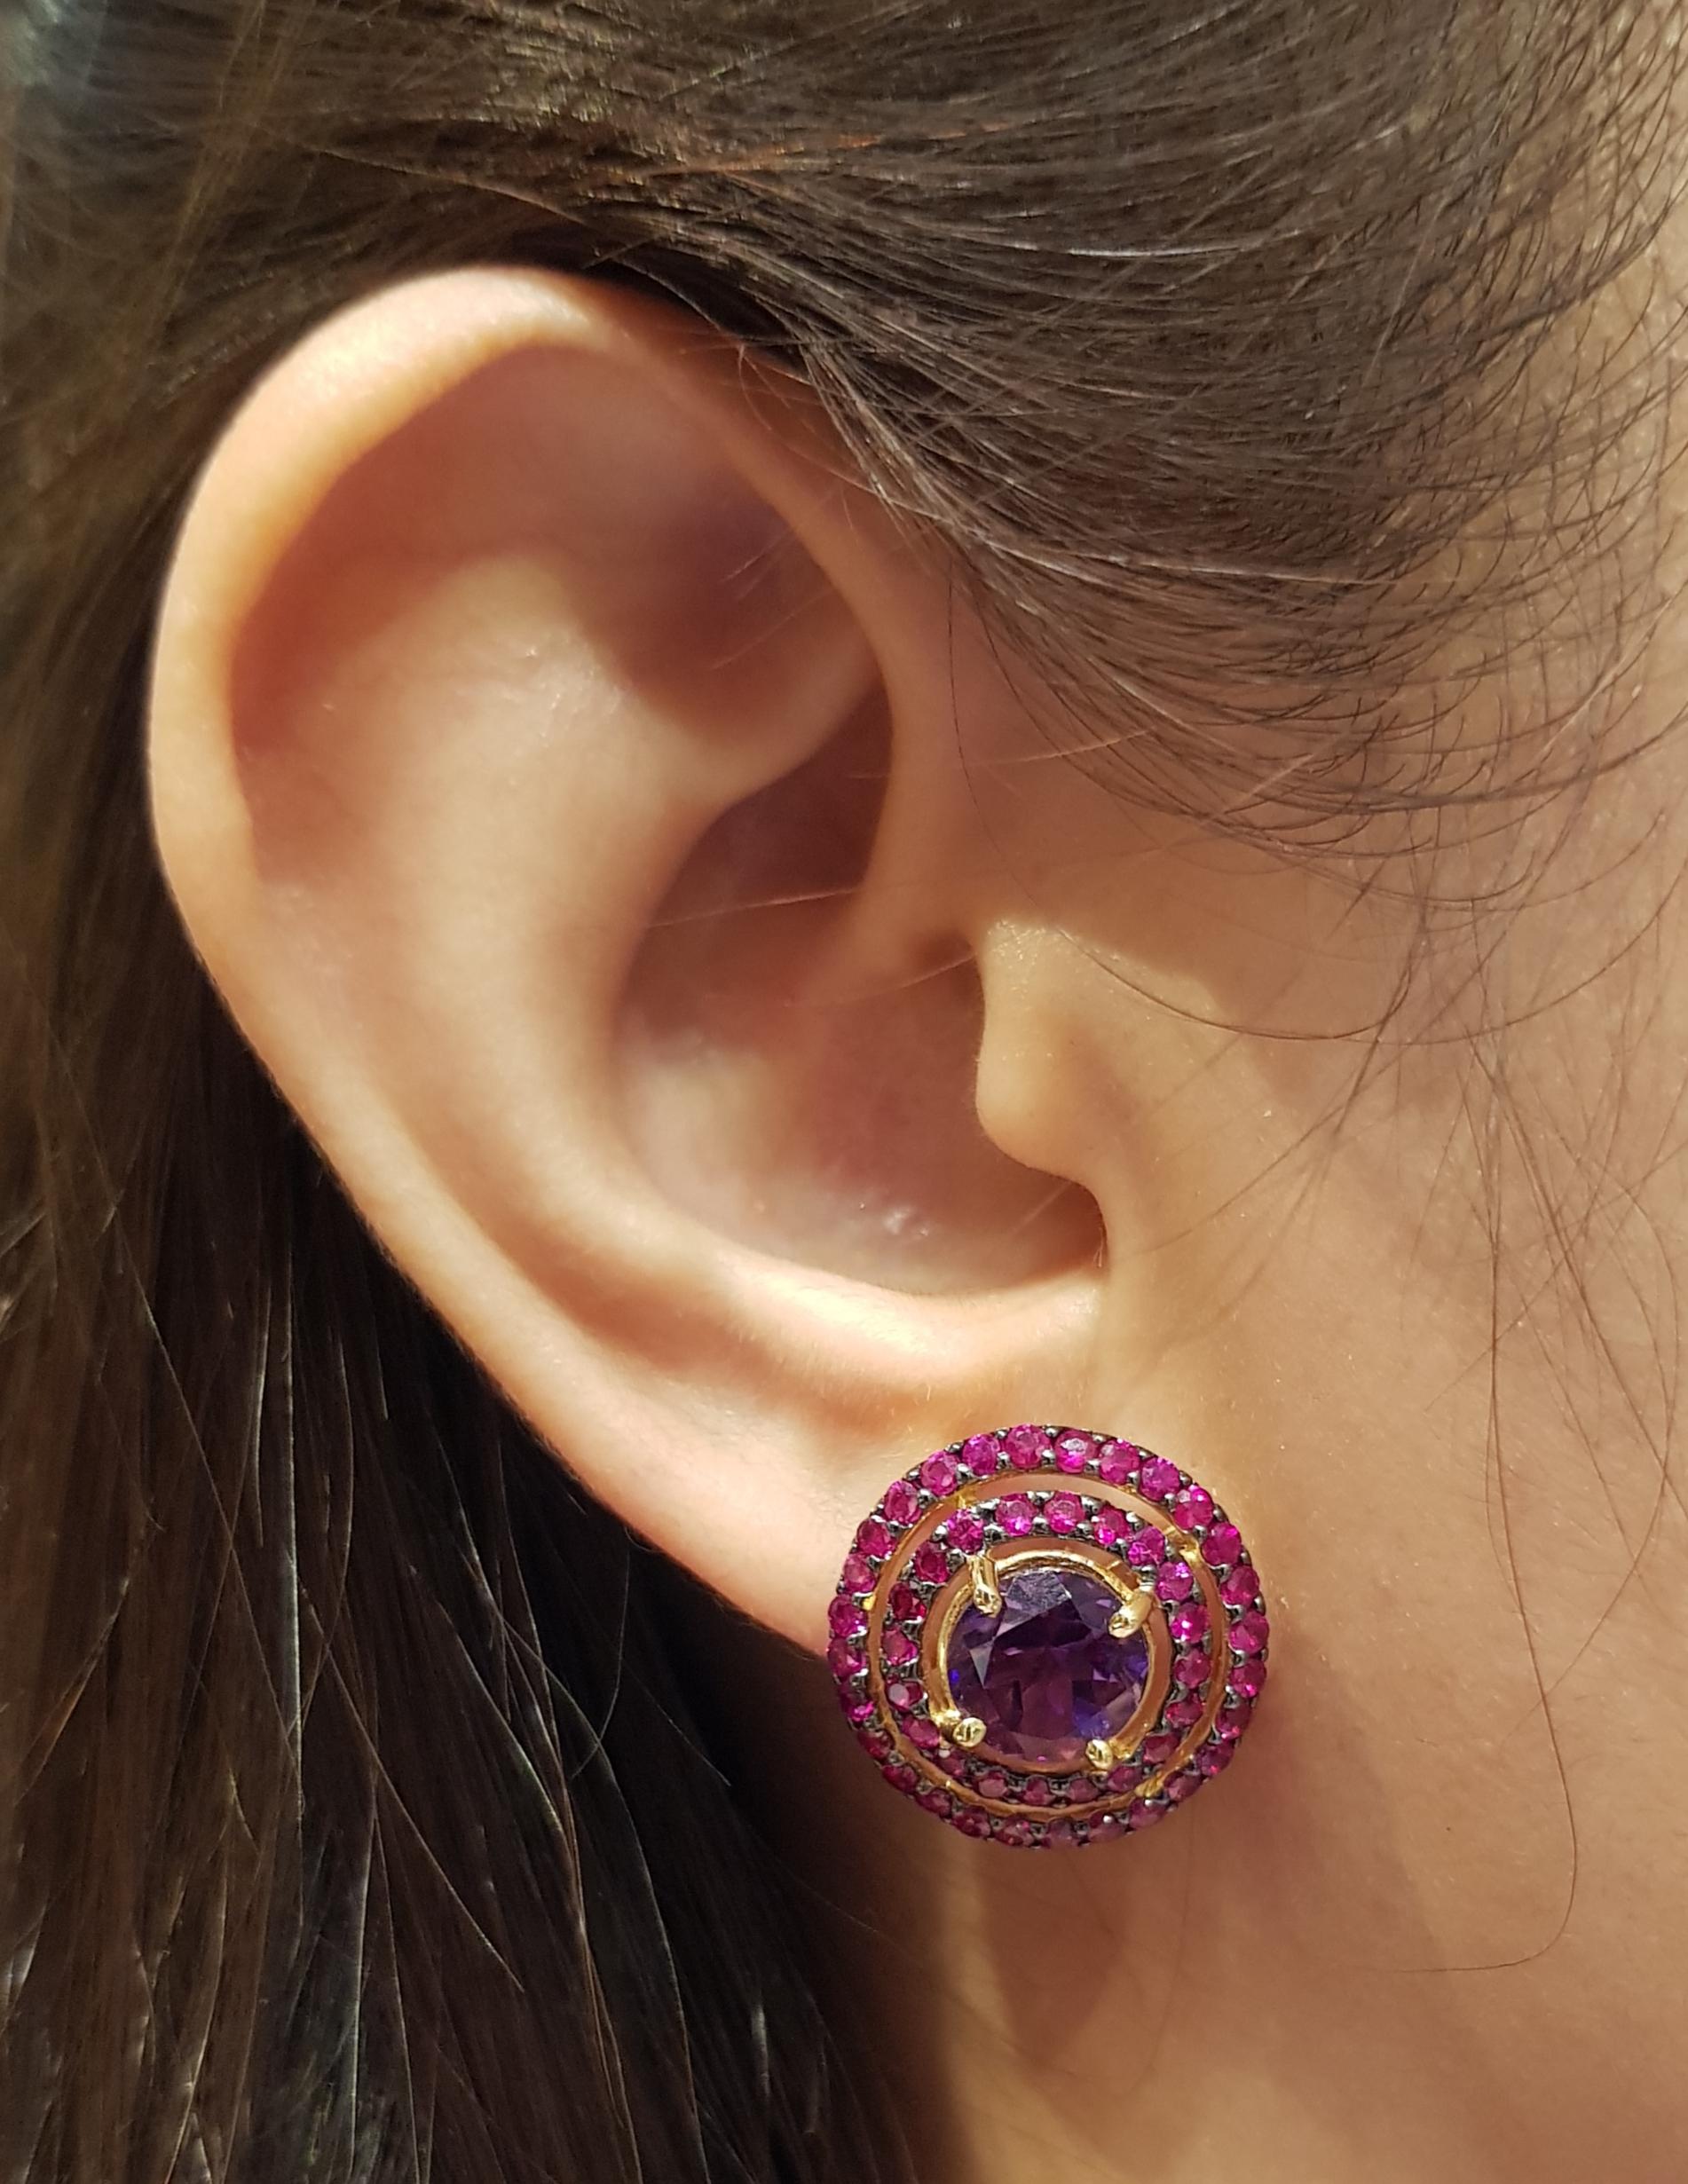 Amethyst 3.91 carats with Ruby 3.62 carats Earrings set in 18 Karat Gold Settings

Width:  1.9 cm 
Length: 1.9 cm
Total Weight: 9.68 grams

